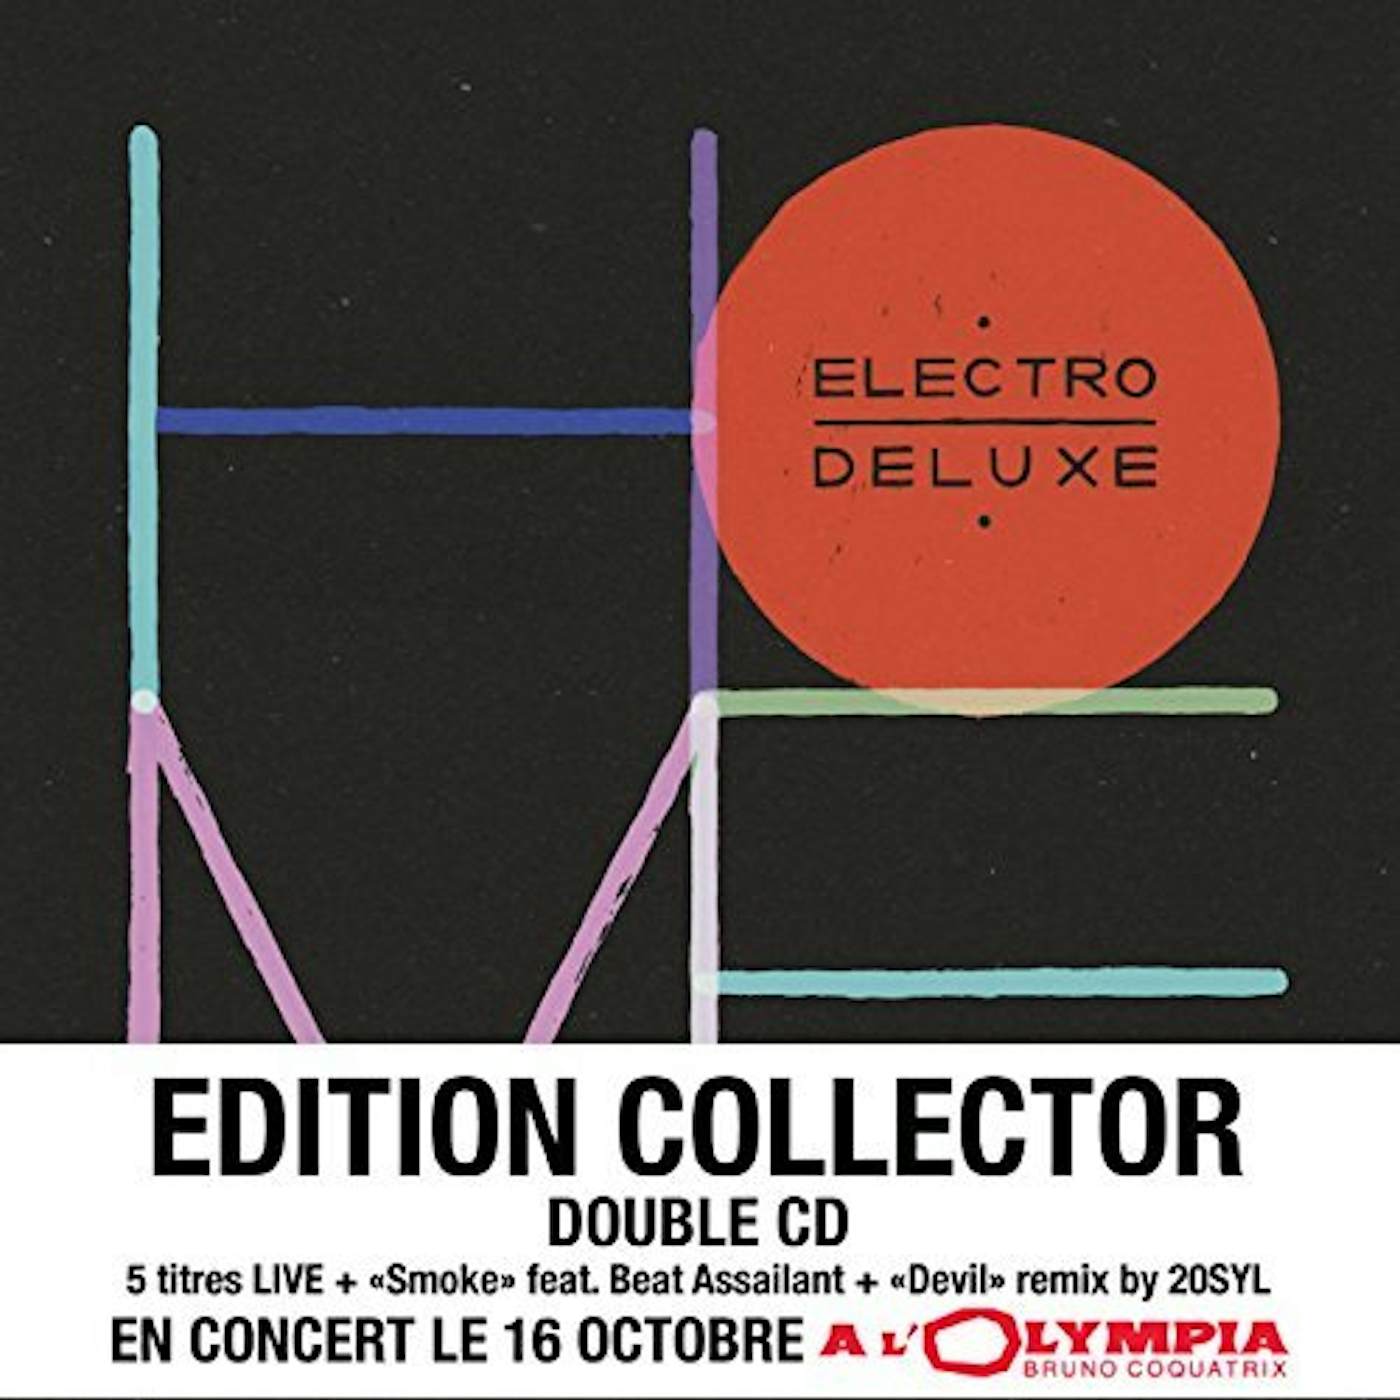 Electro Deluxe HOME CD